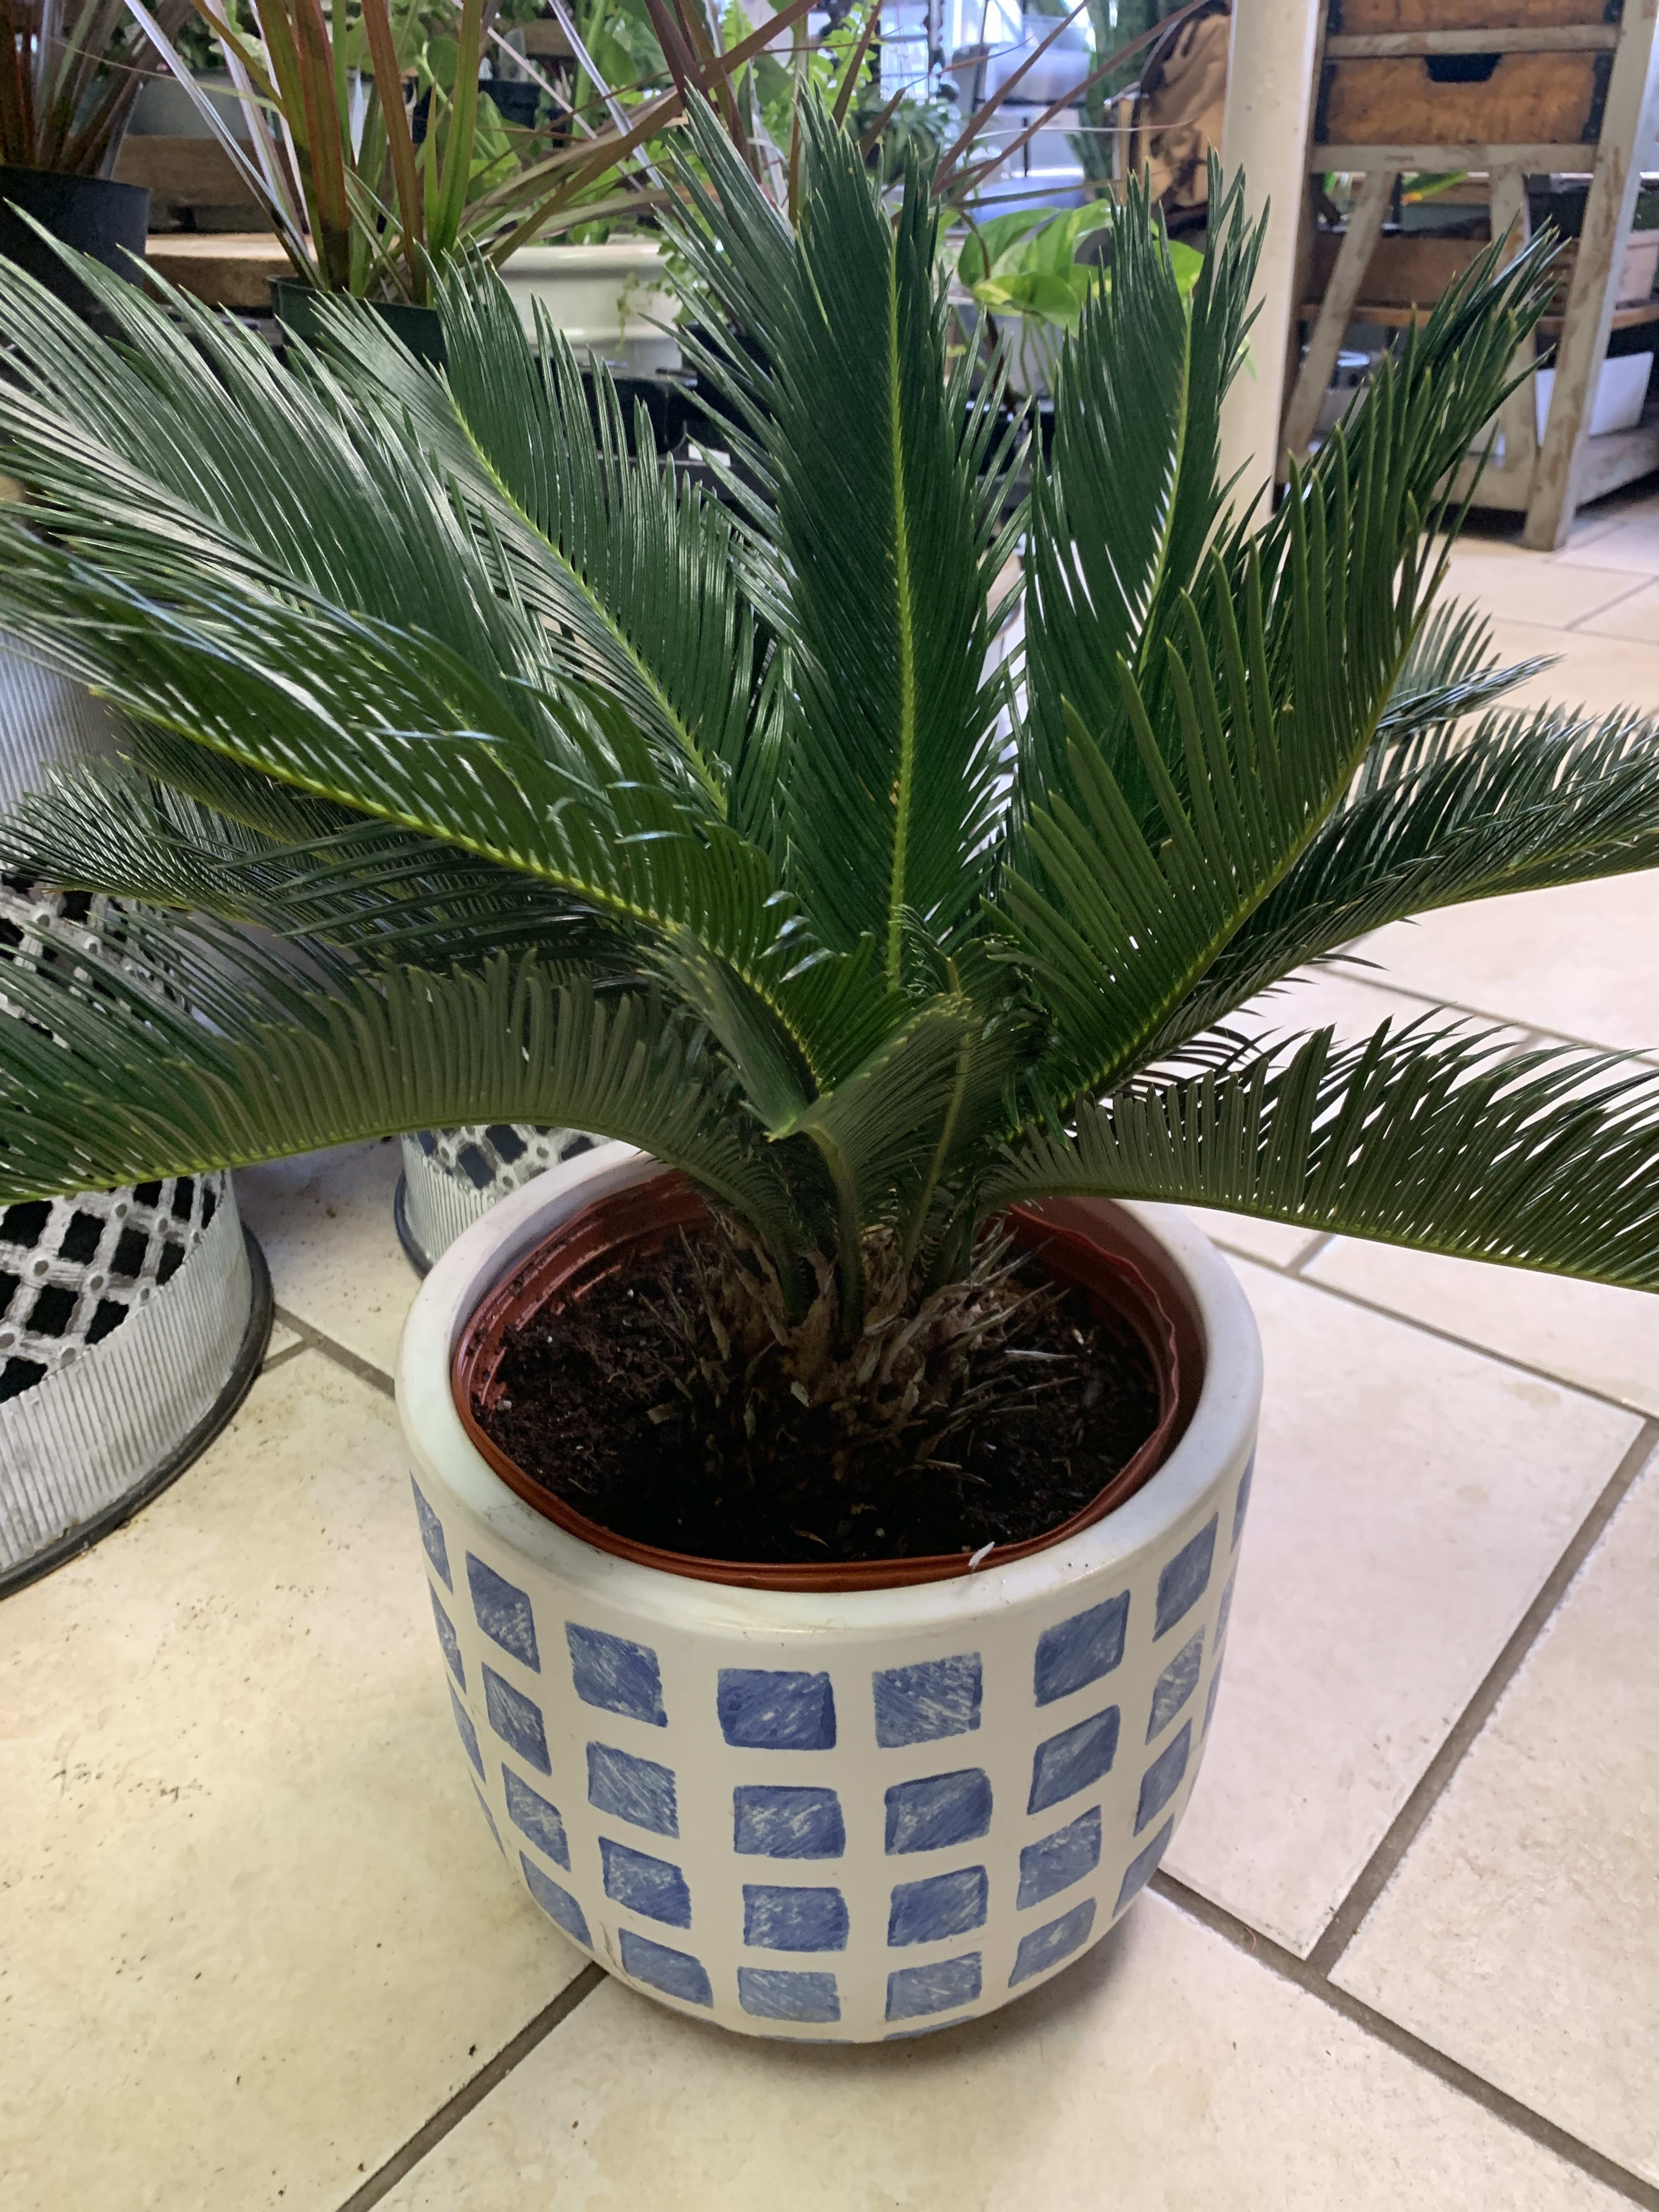 Sago Palm Houseplant - This trendy house plant is sure to please. Easy to take care of in a medium to brighter light location. Size 9” plastic container. (Decorative planter not included*)